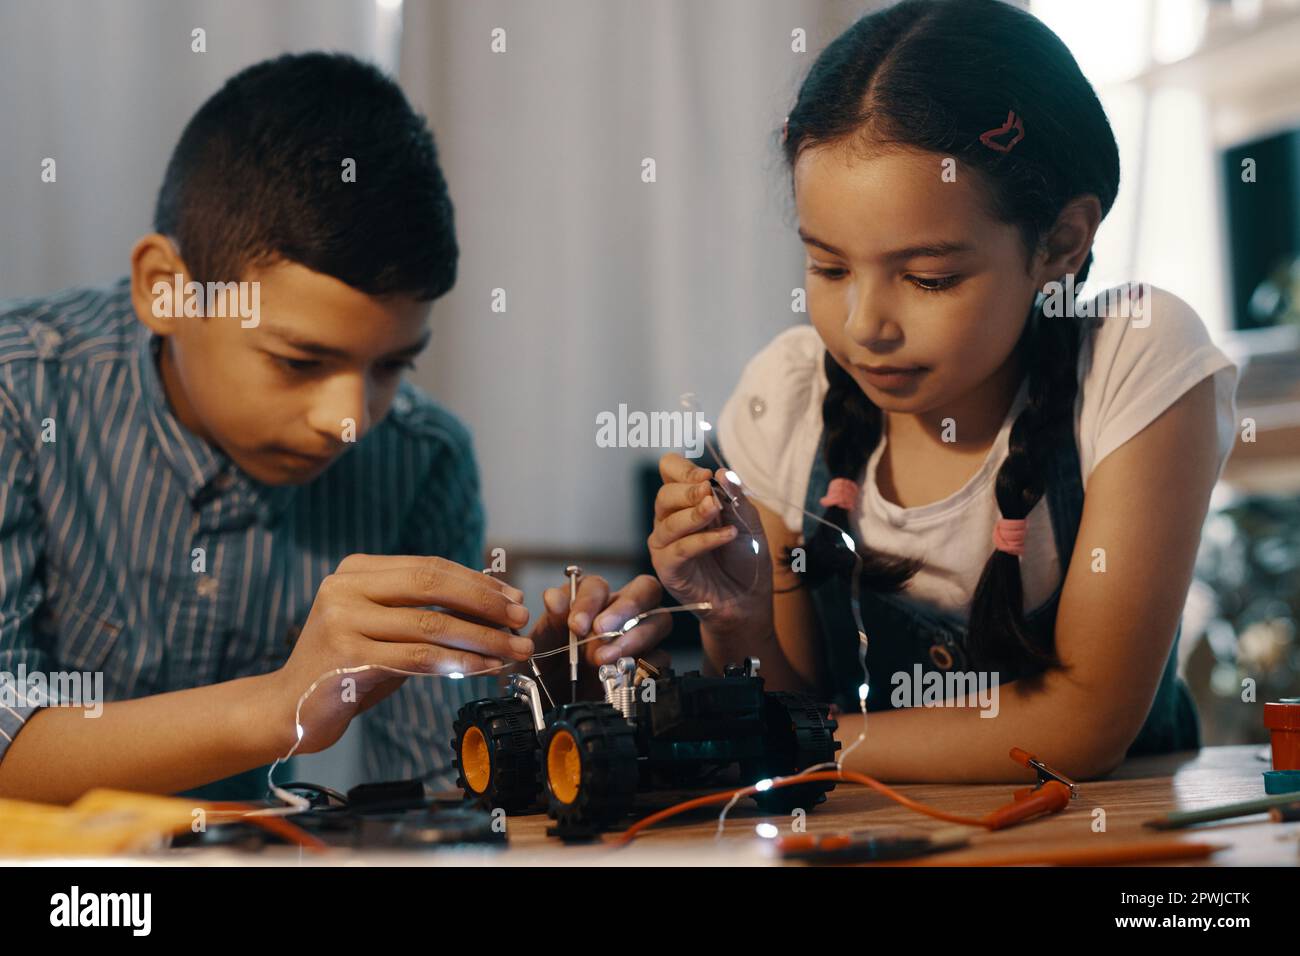 Their technical skills are already at a high level. two adorable young siblings building a robotic toy car together at home Stock Photo